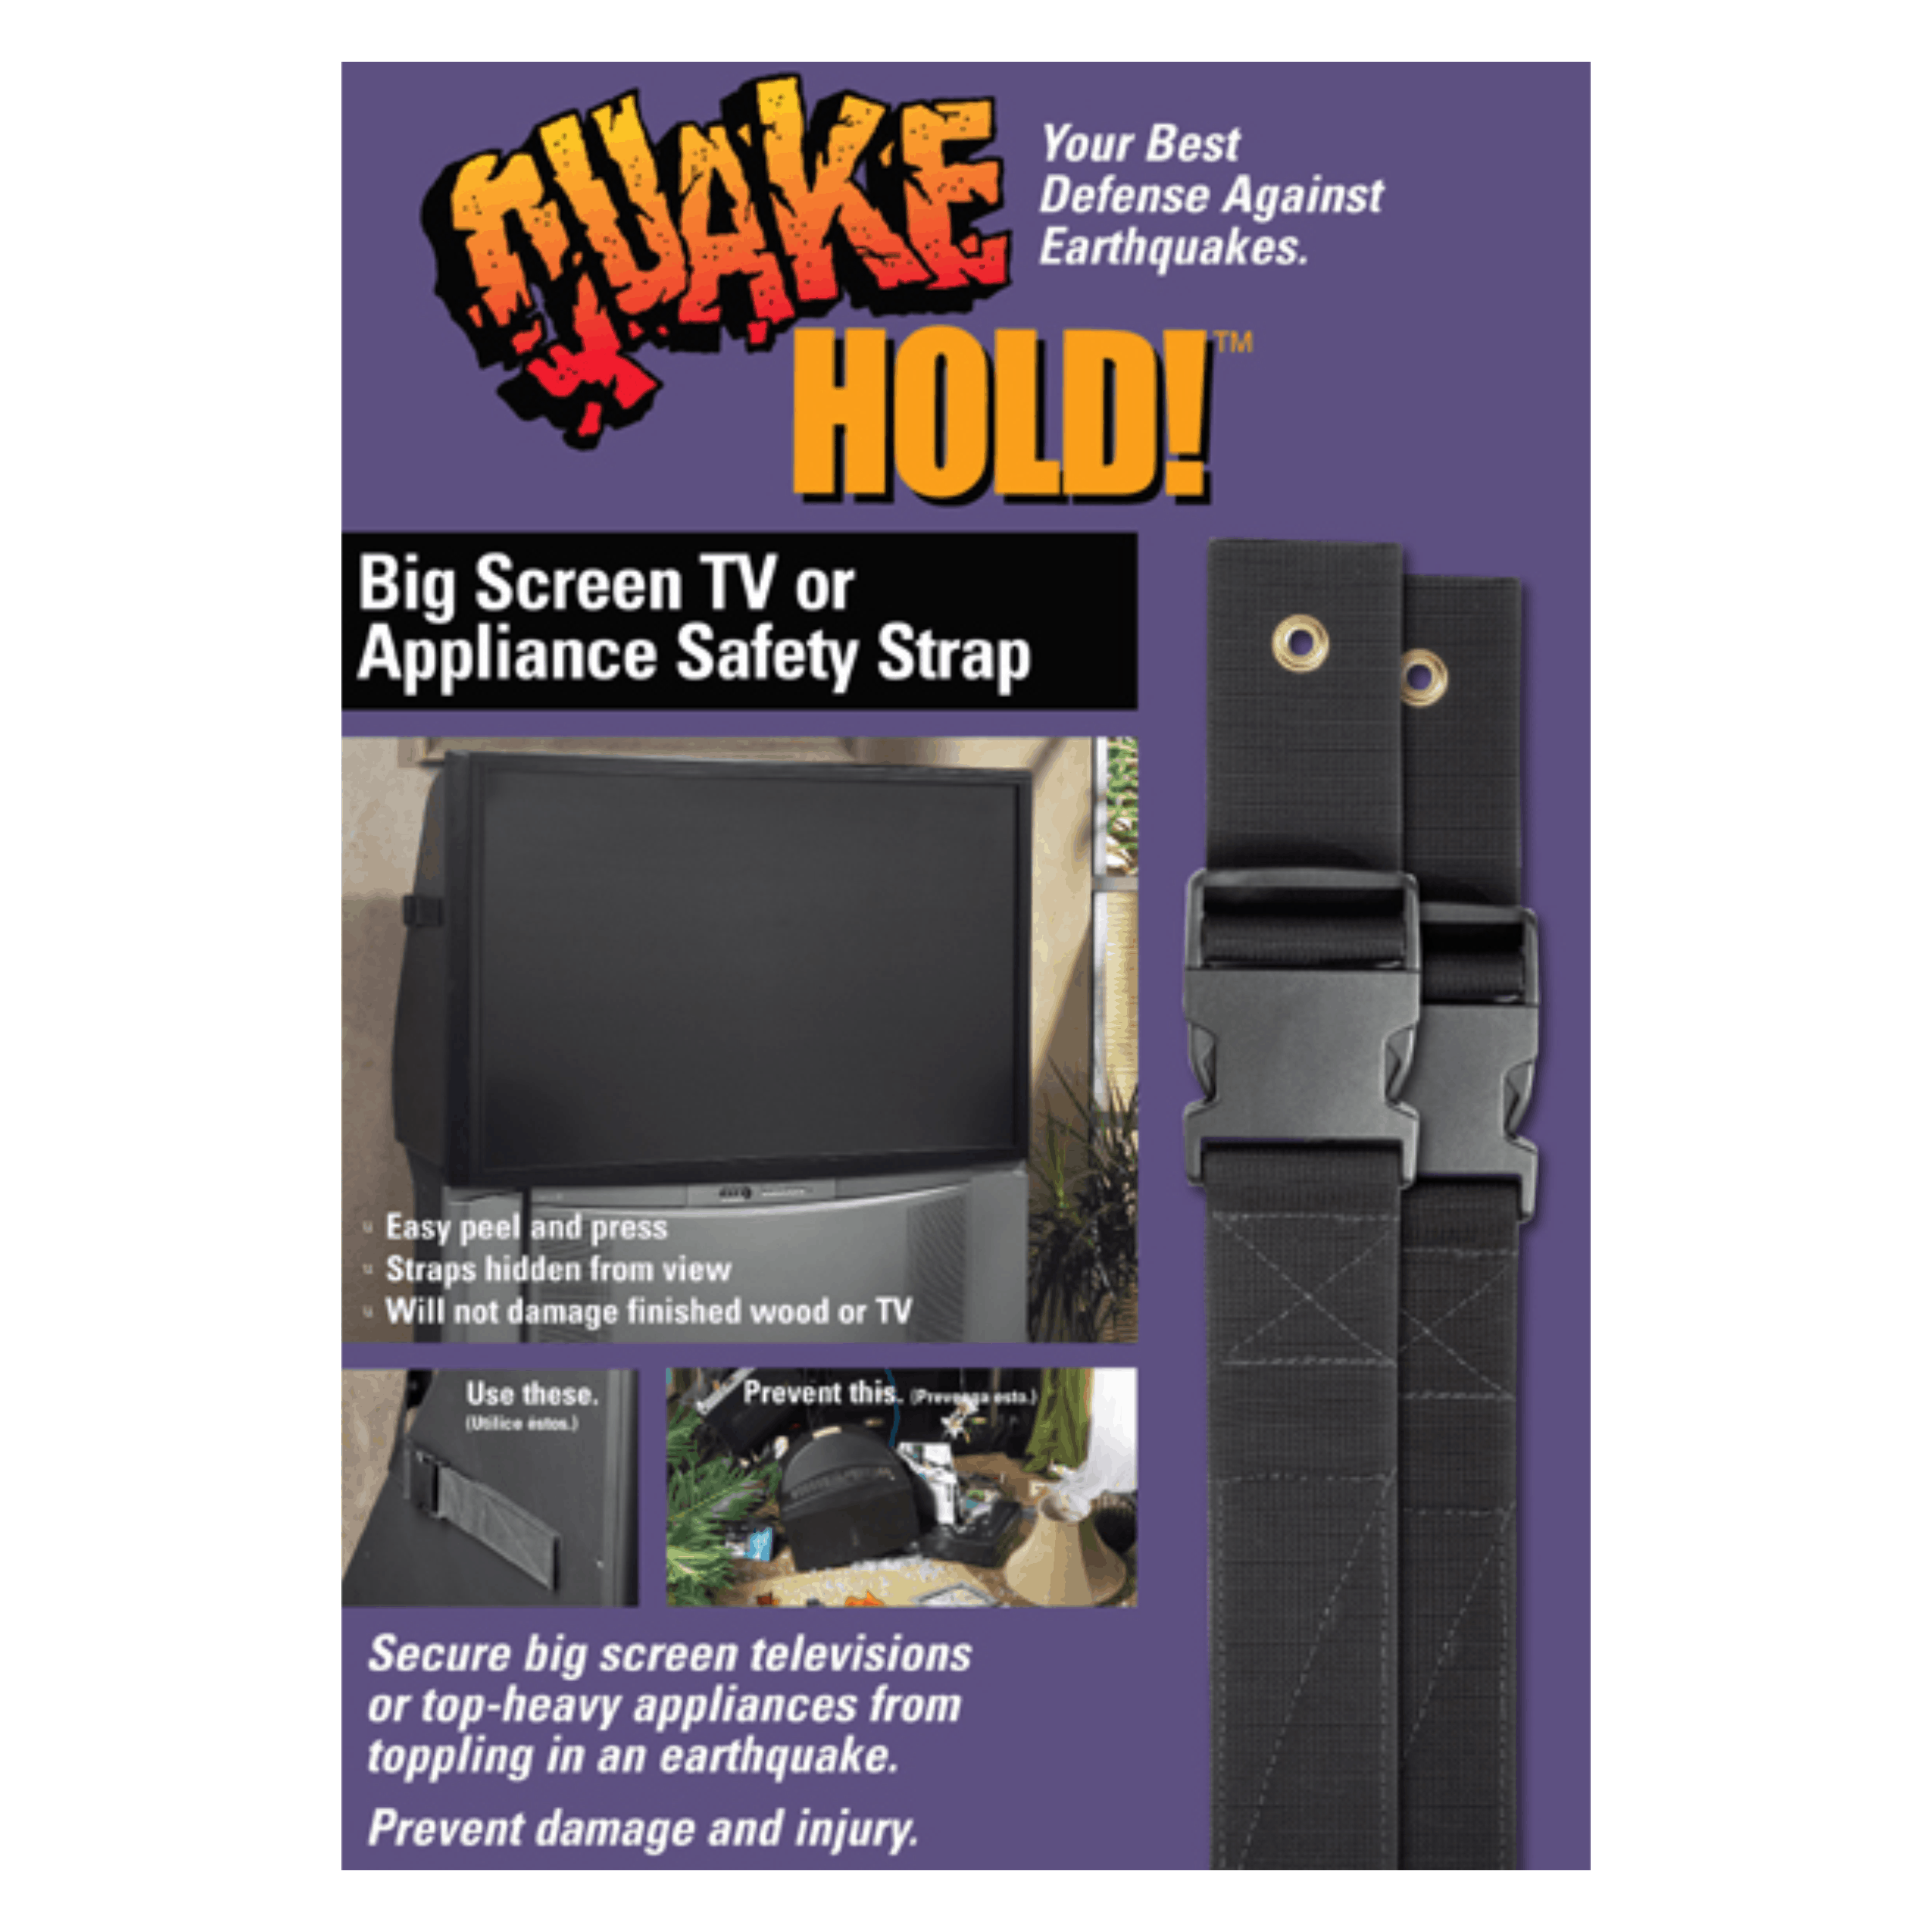 QuakeHOLD! Office File Cabinet Strap